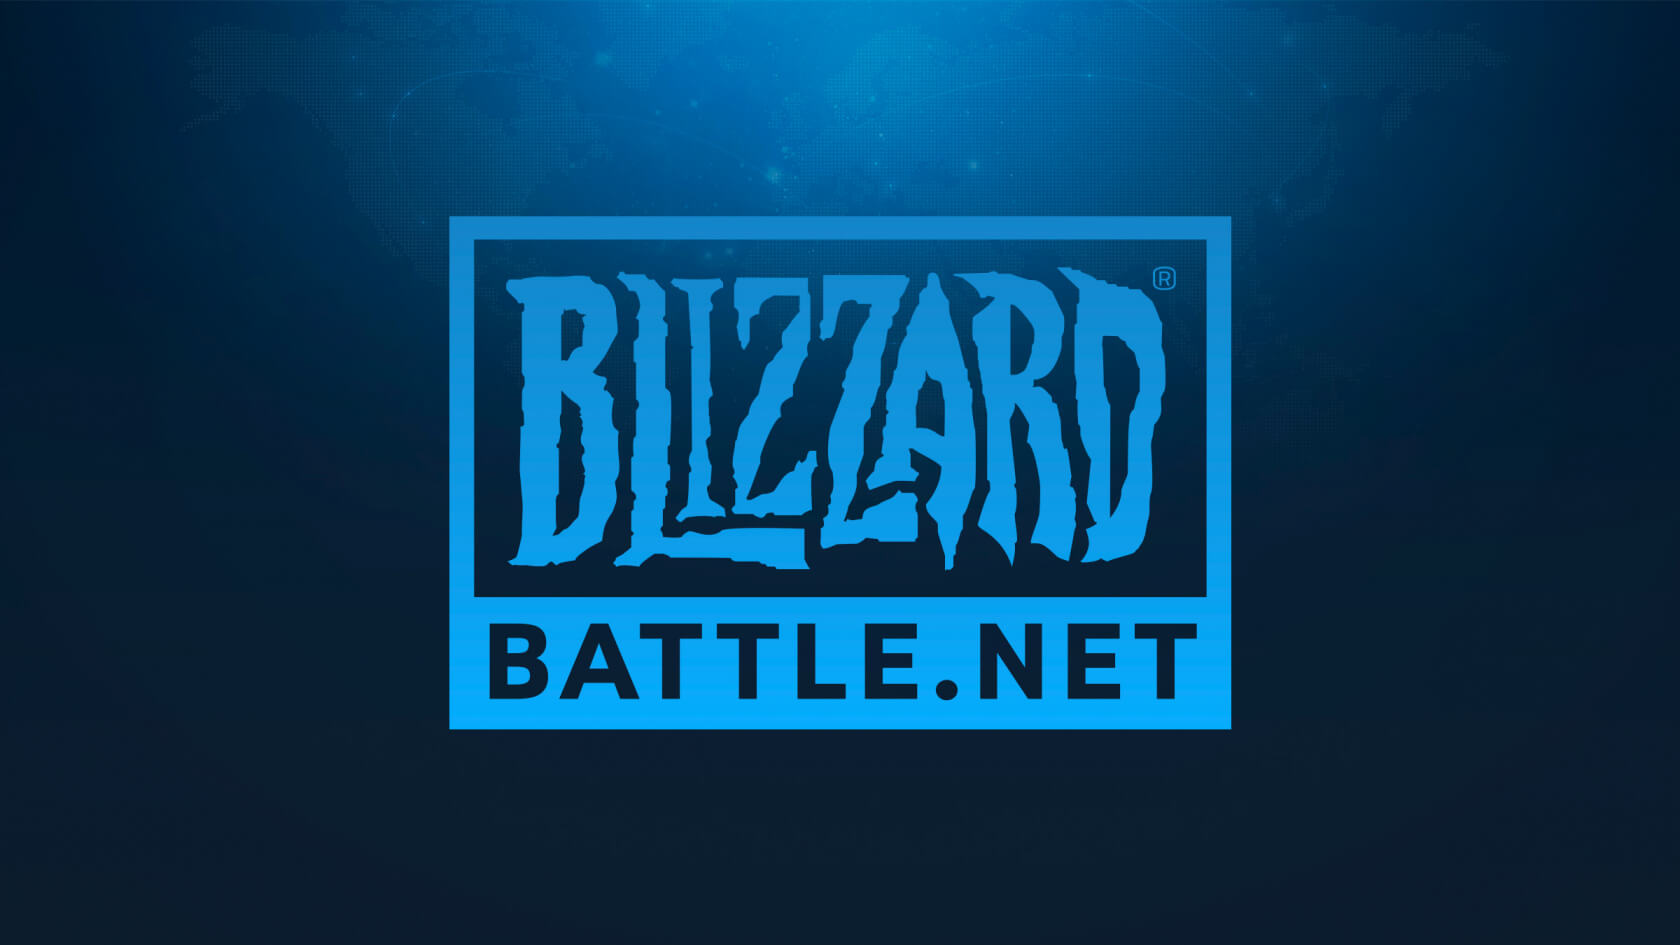 Blizzard to bring back Battle.net after acknowledging they screwed up with rebranding